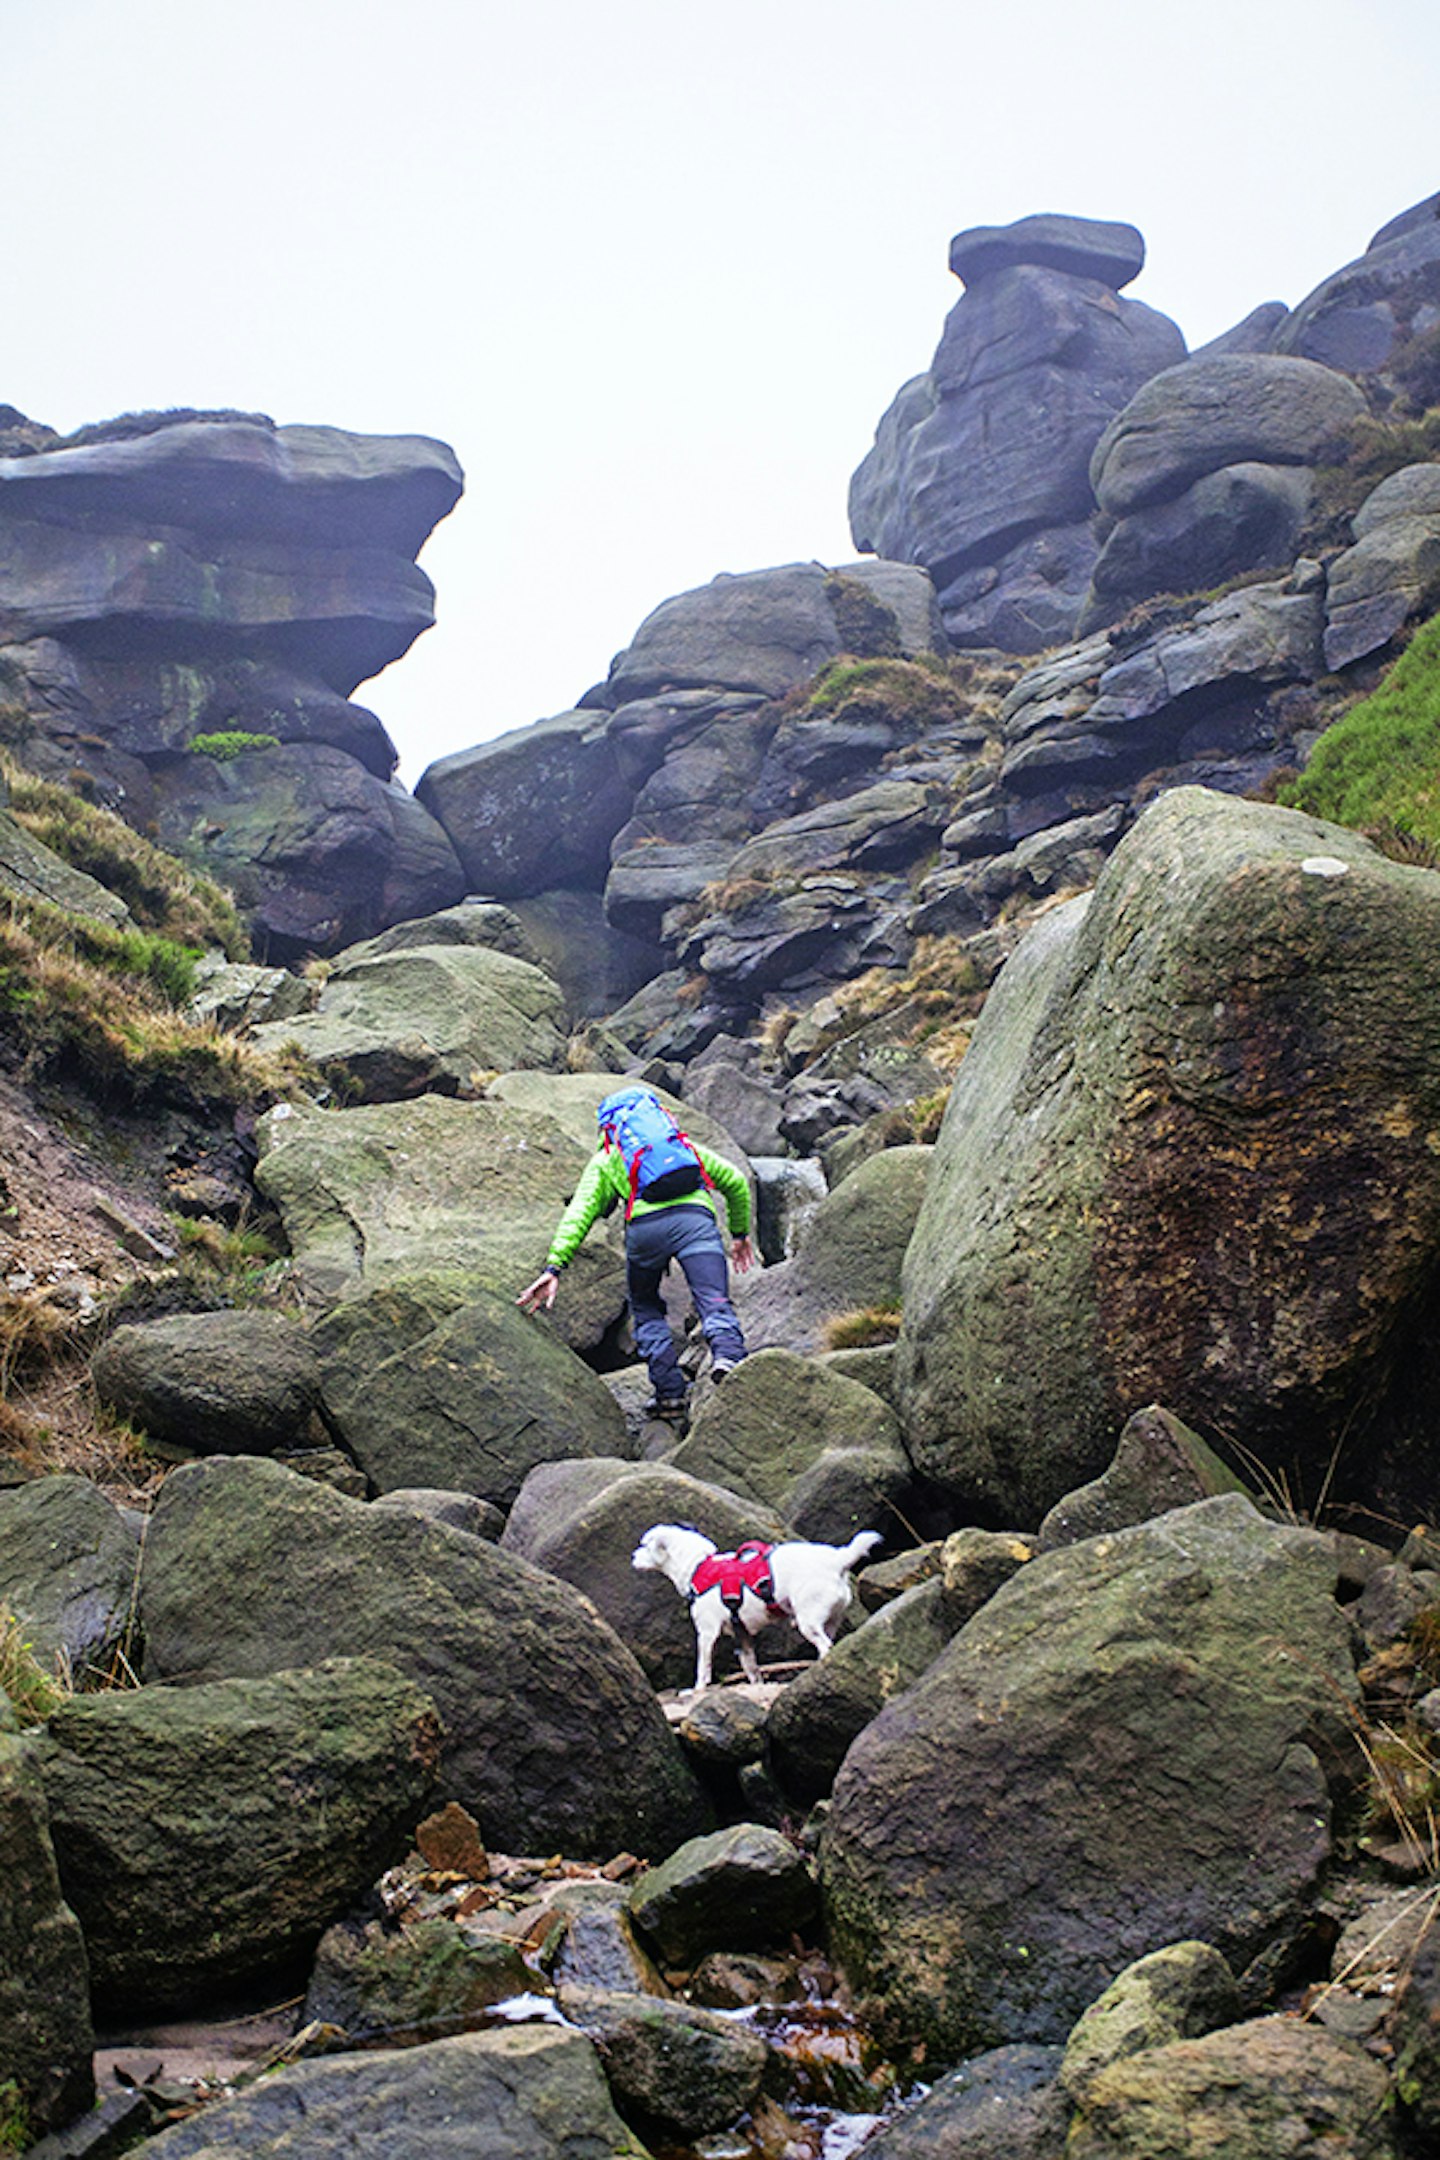 This route includes some general bouldery clambering – it’s all good fun!